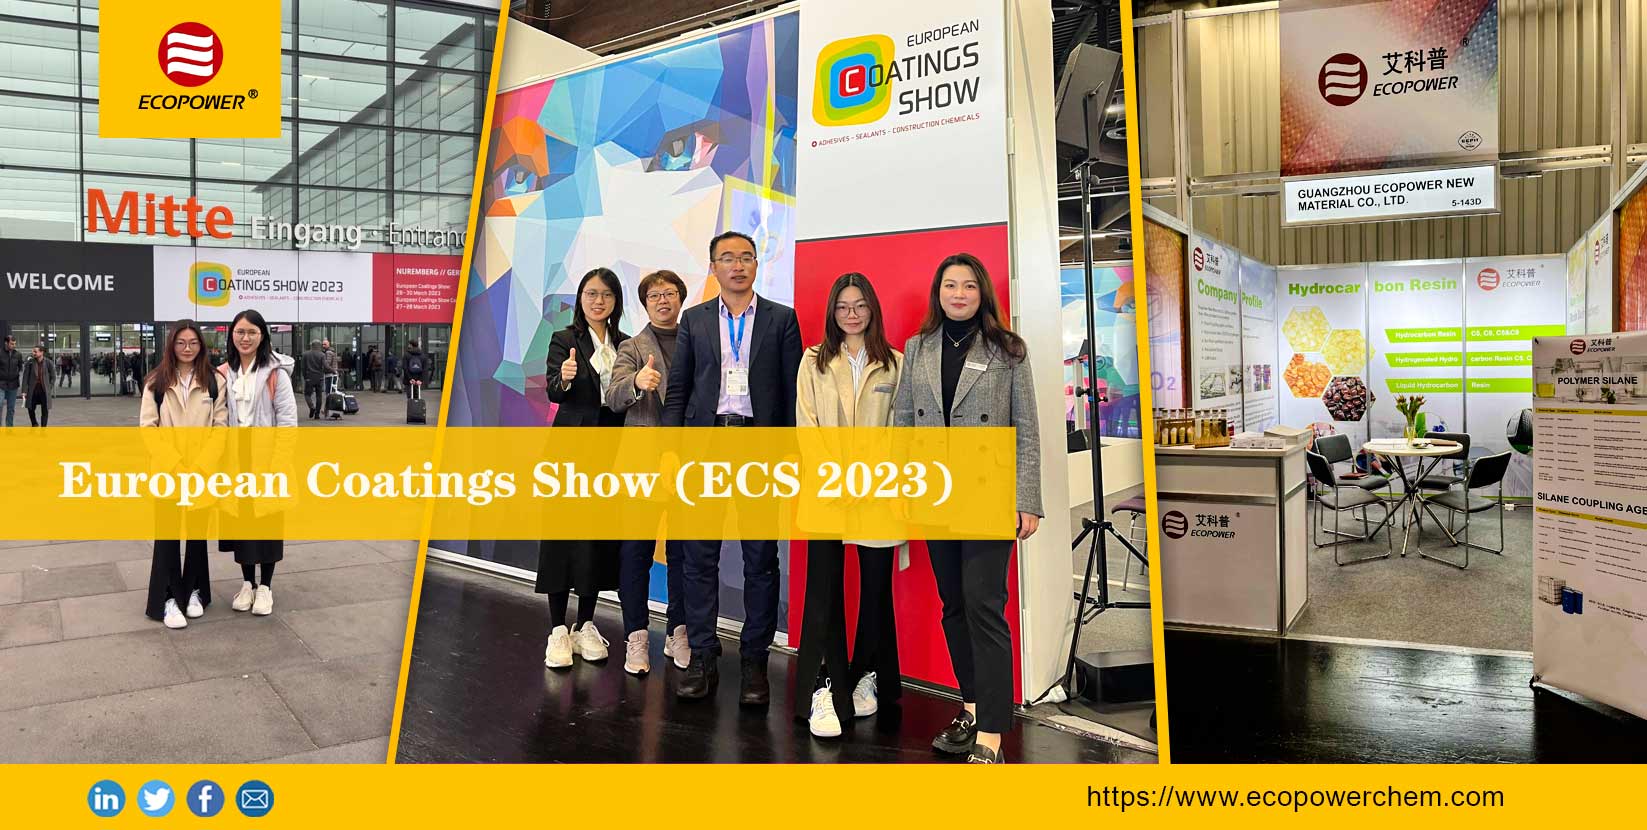 Successful Participation in European Coatings Show 2023 - ECOPOWER